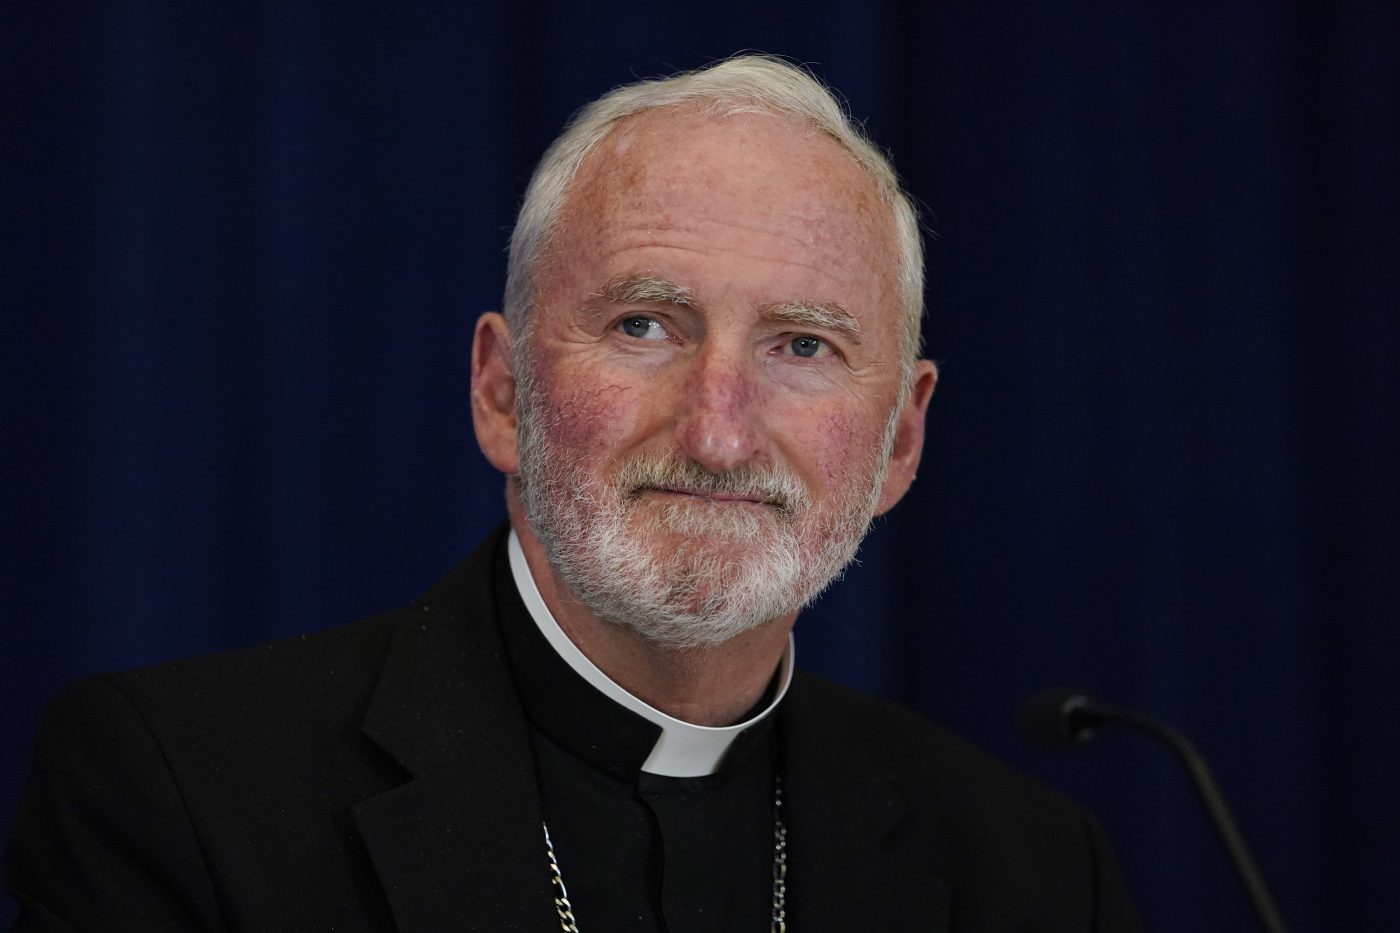 Bishop David O'Connell, of the Archdiocese of Los Angeles, attends a news conference at the Fall General Assembly meeting of the United States Conference of Catholic Bishops, on Nov. 17, 2021, in Baltimore. (Julio Cortez/Associated Press)